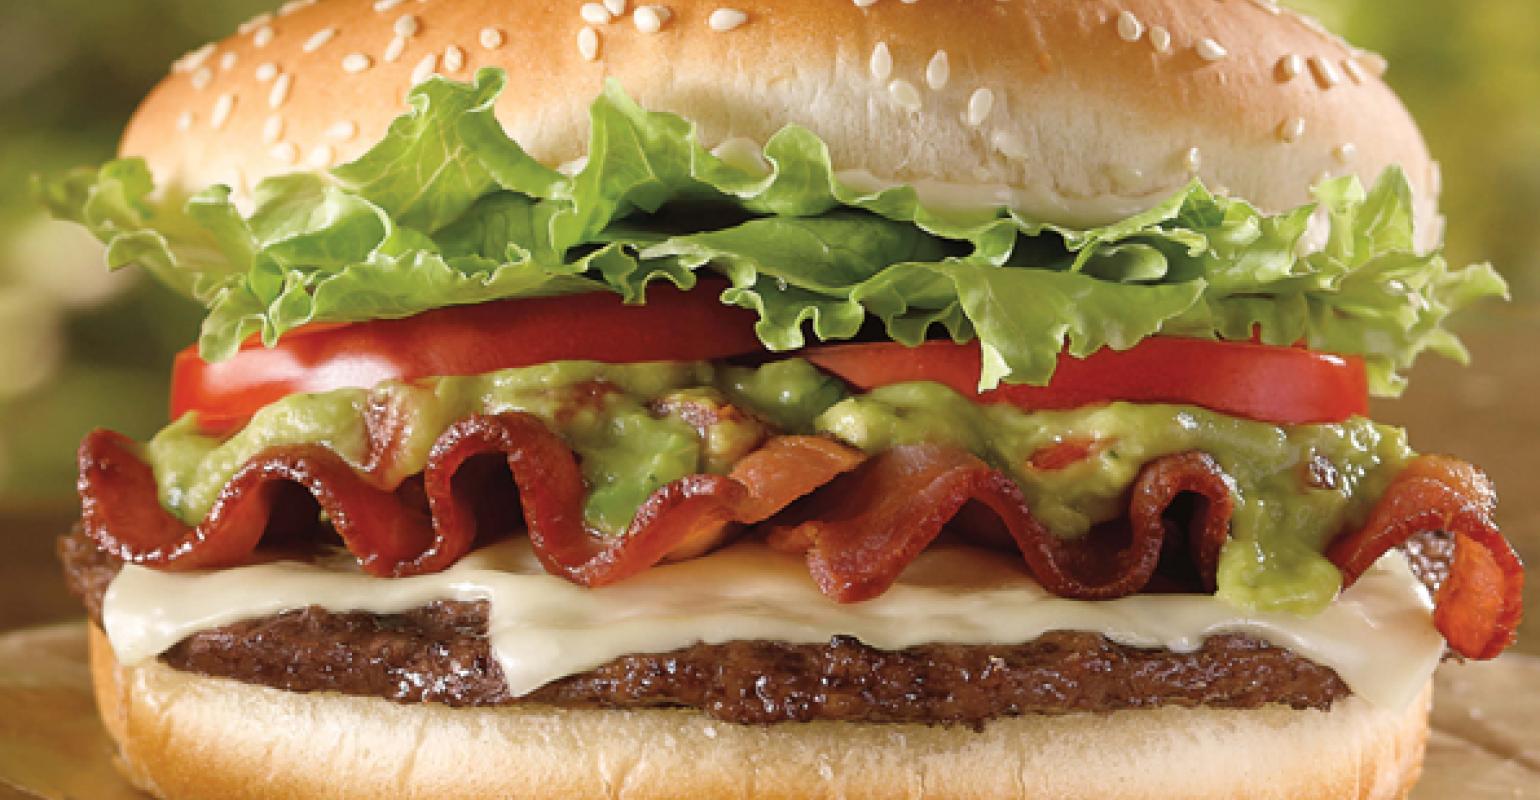 Burger King marks Whopper's anniversary with 55-cent promotion